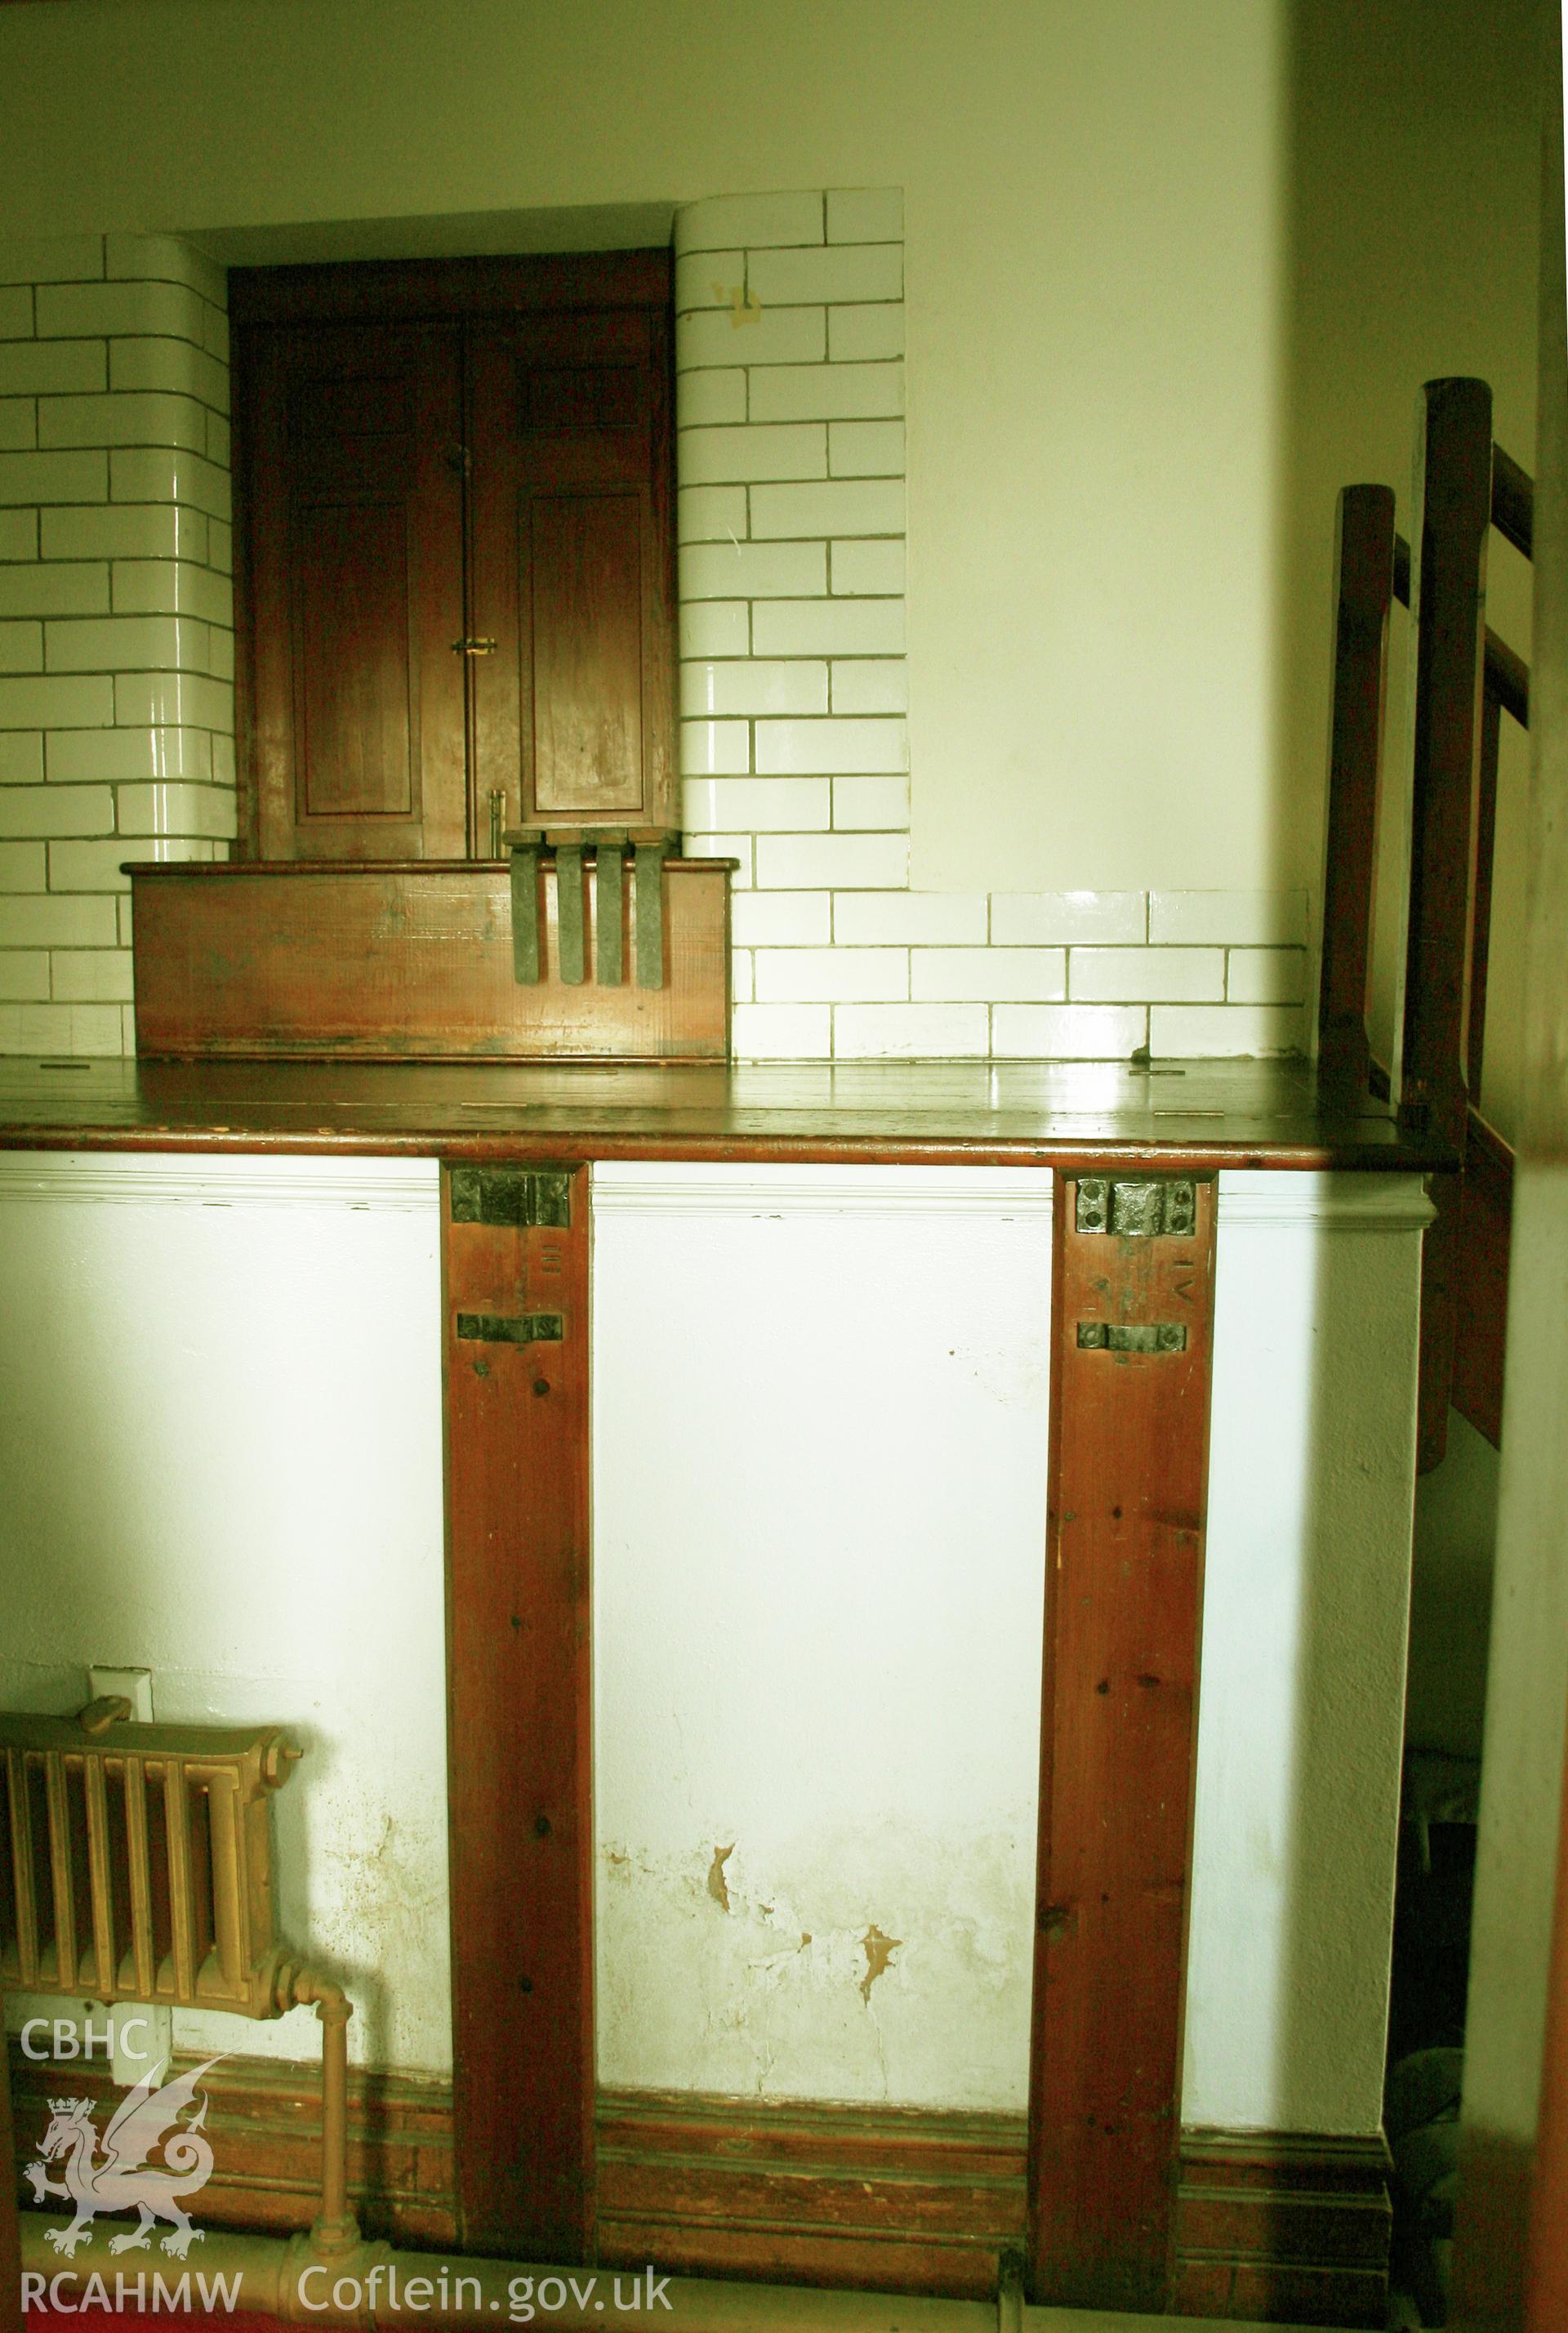 Baptismal tank at rear with access through doorway to pulpit.